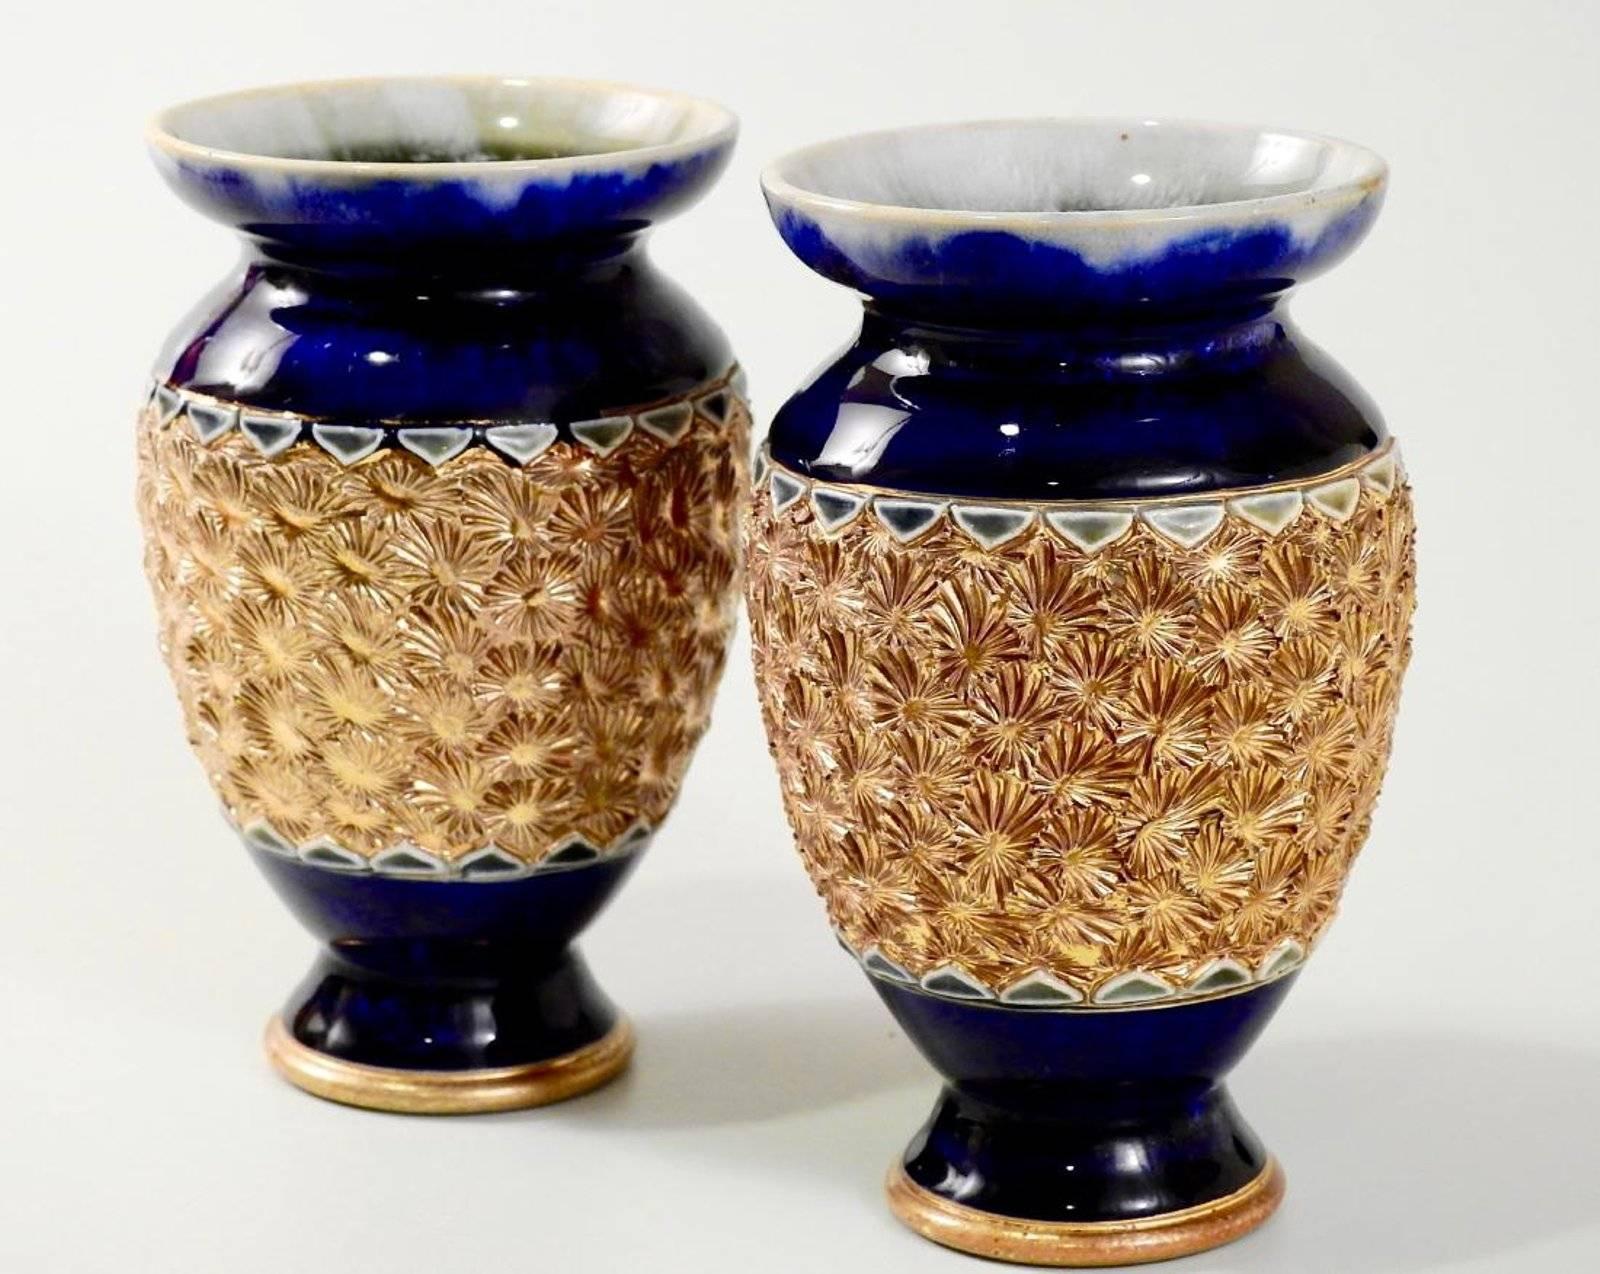 Lot of Royal Doulton including the following items:

Royal Doulton cobalt gold starburst encrusted vase pair, early 20th century aesthetic pottery vases
Approximately 5 1/16 inches tall. Perfect vintage condition.
Antique Doulton Lambeth